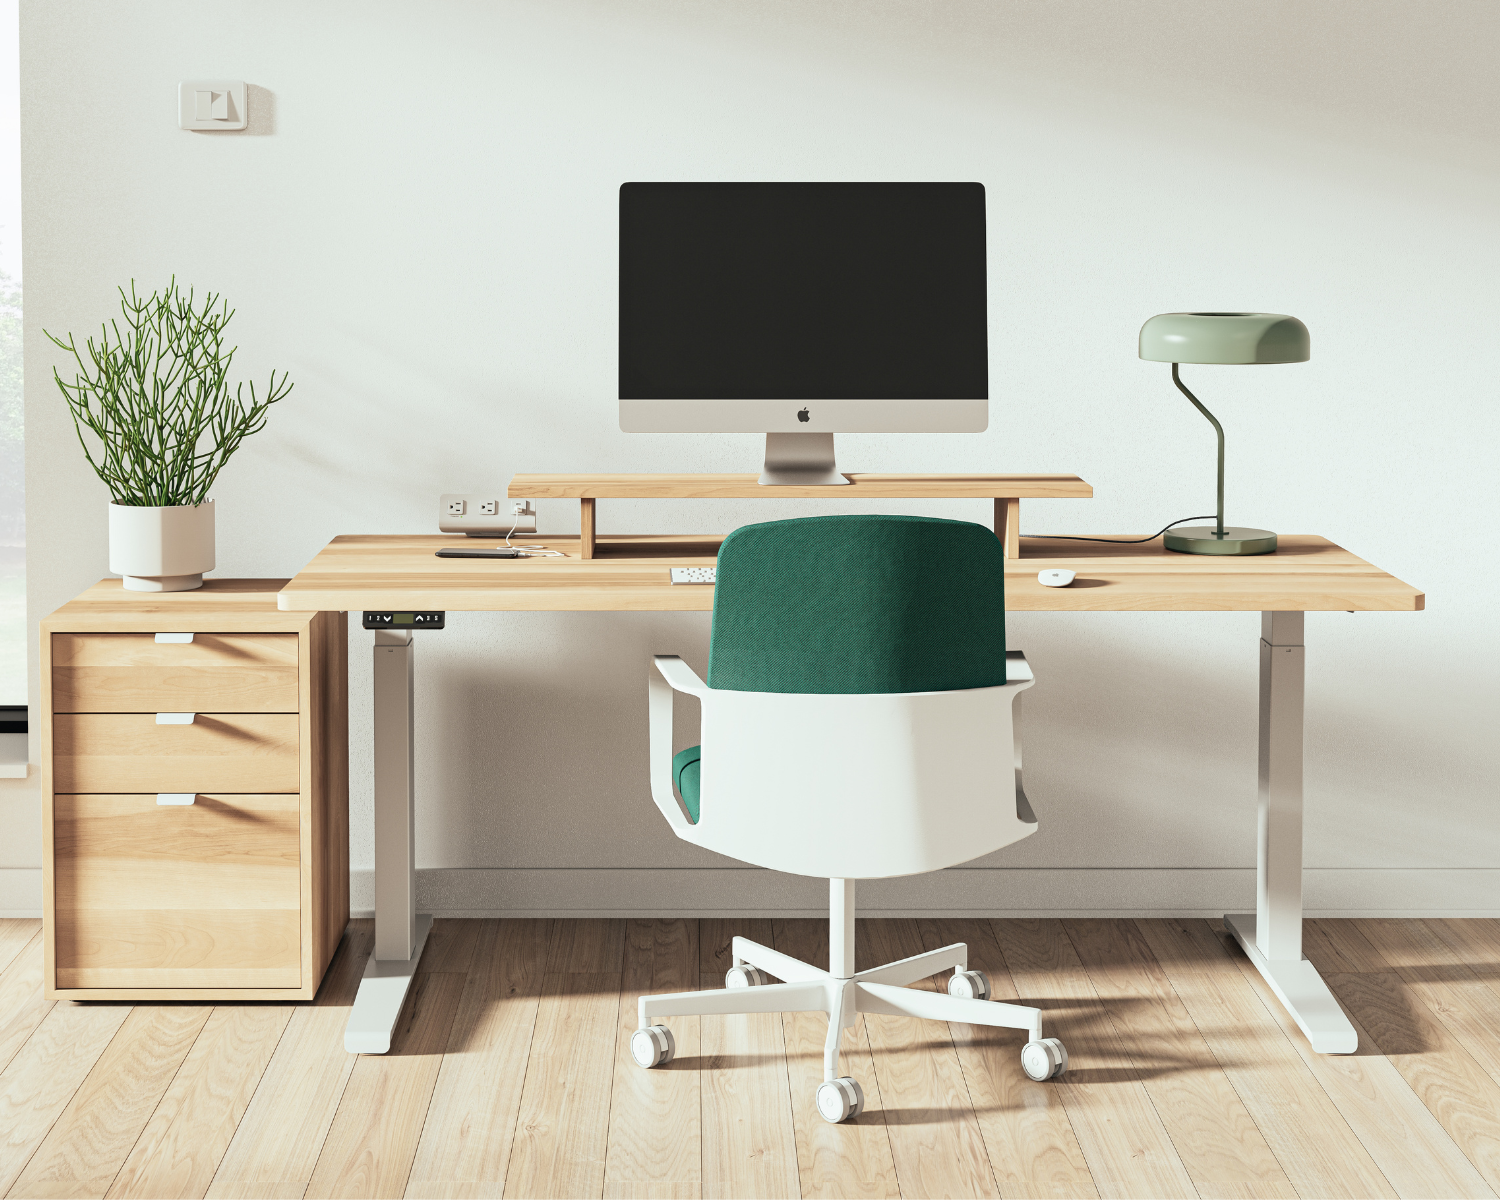 Office Furniture Made of Wood